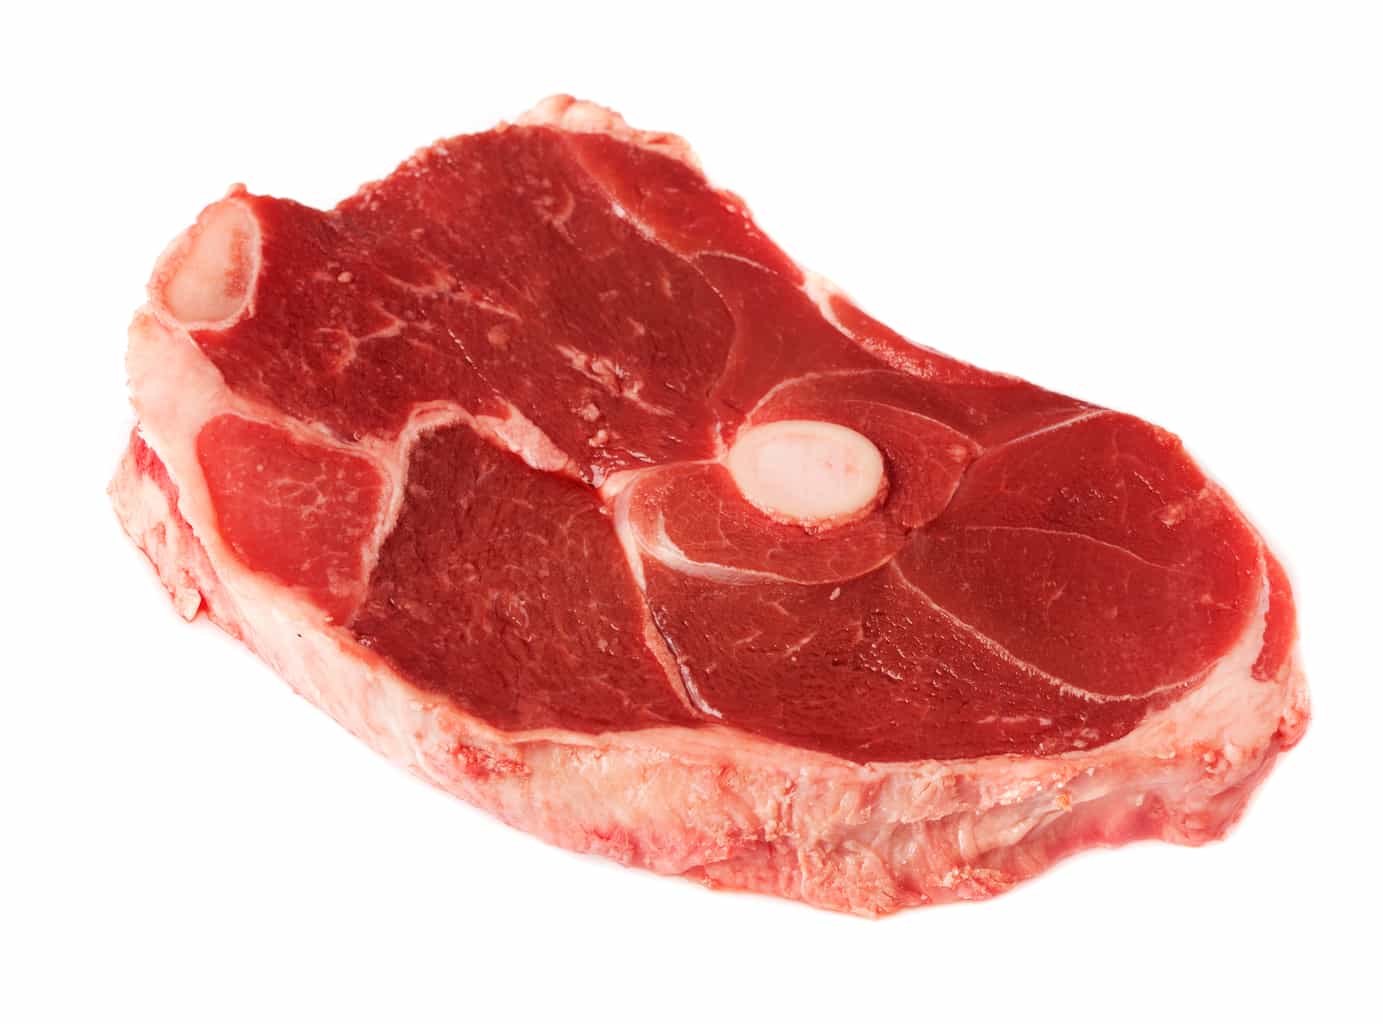 How to eat red meat without getting too much iron